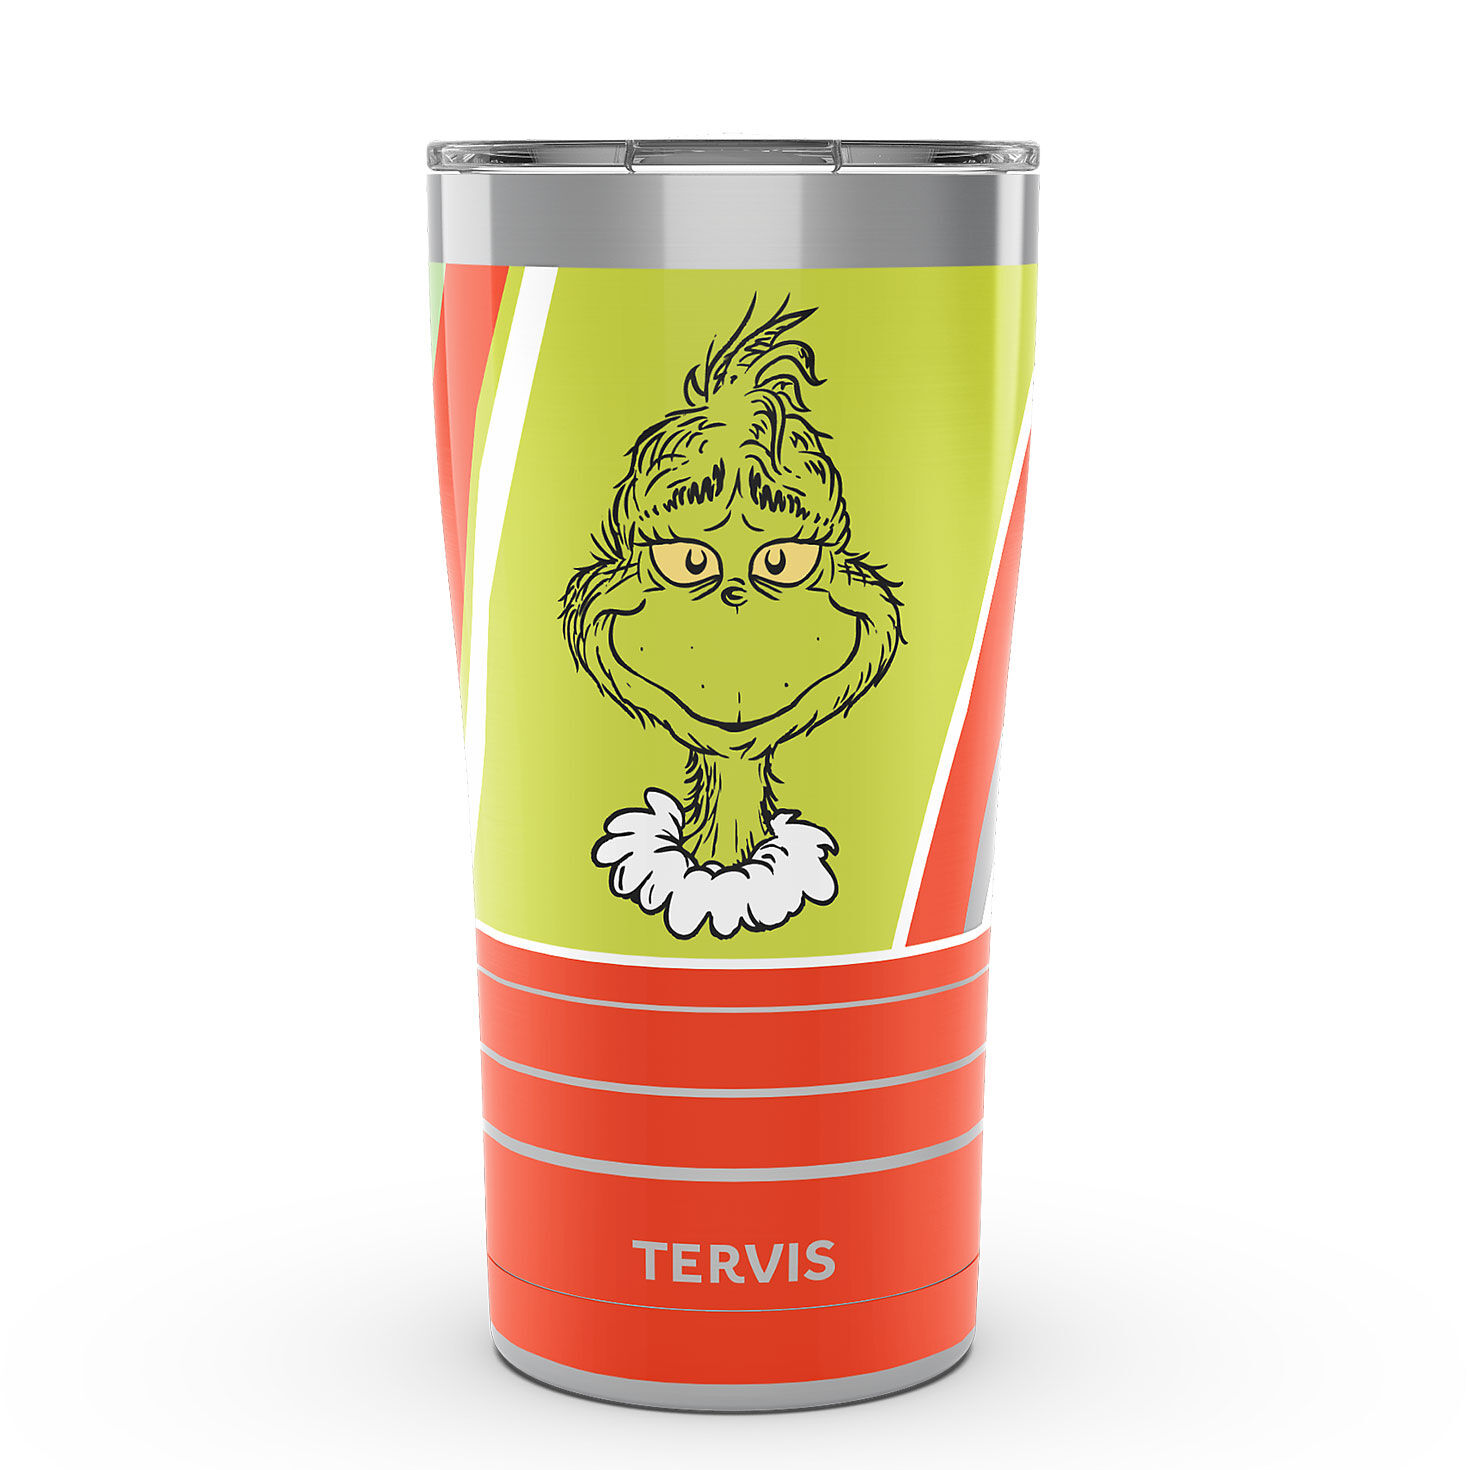 Tervis Dr. Seuss Grinch Stainless Steel Tumbler, 20 oz. - Insulated Tumblers  - Hallmark